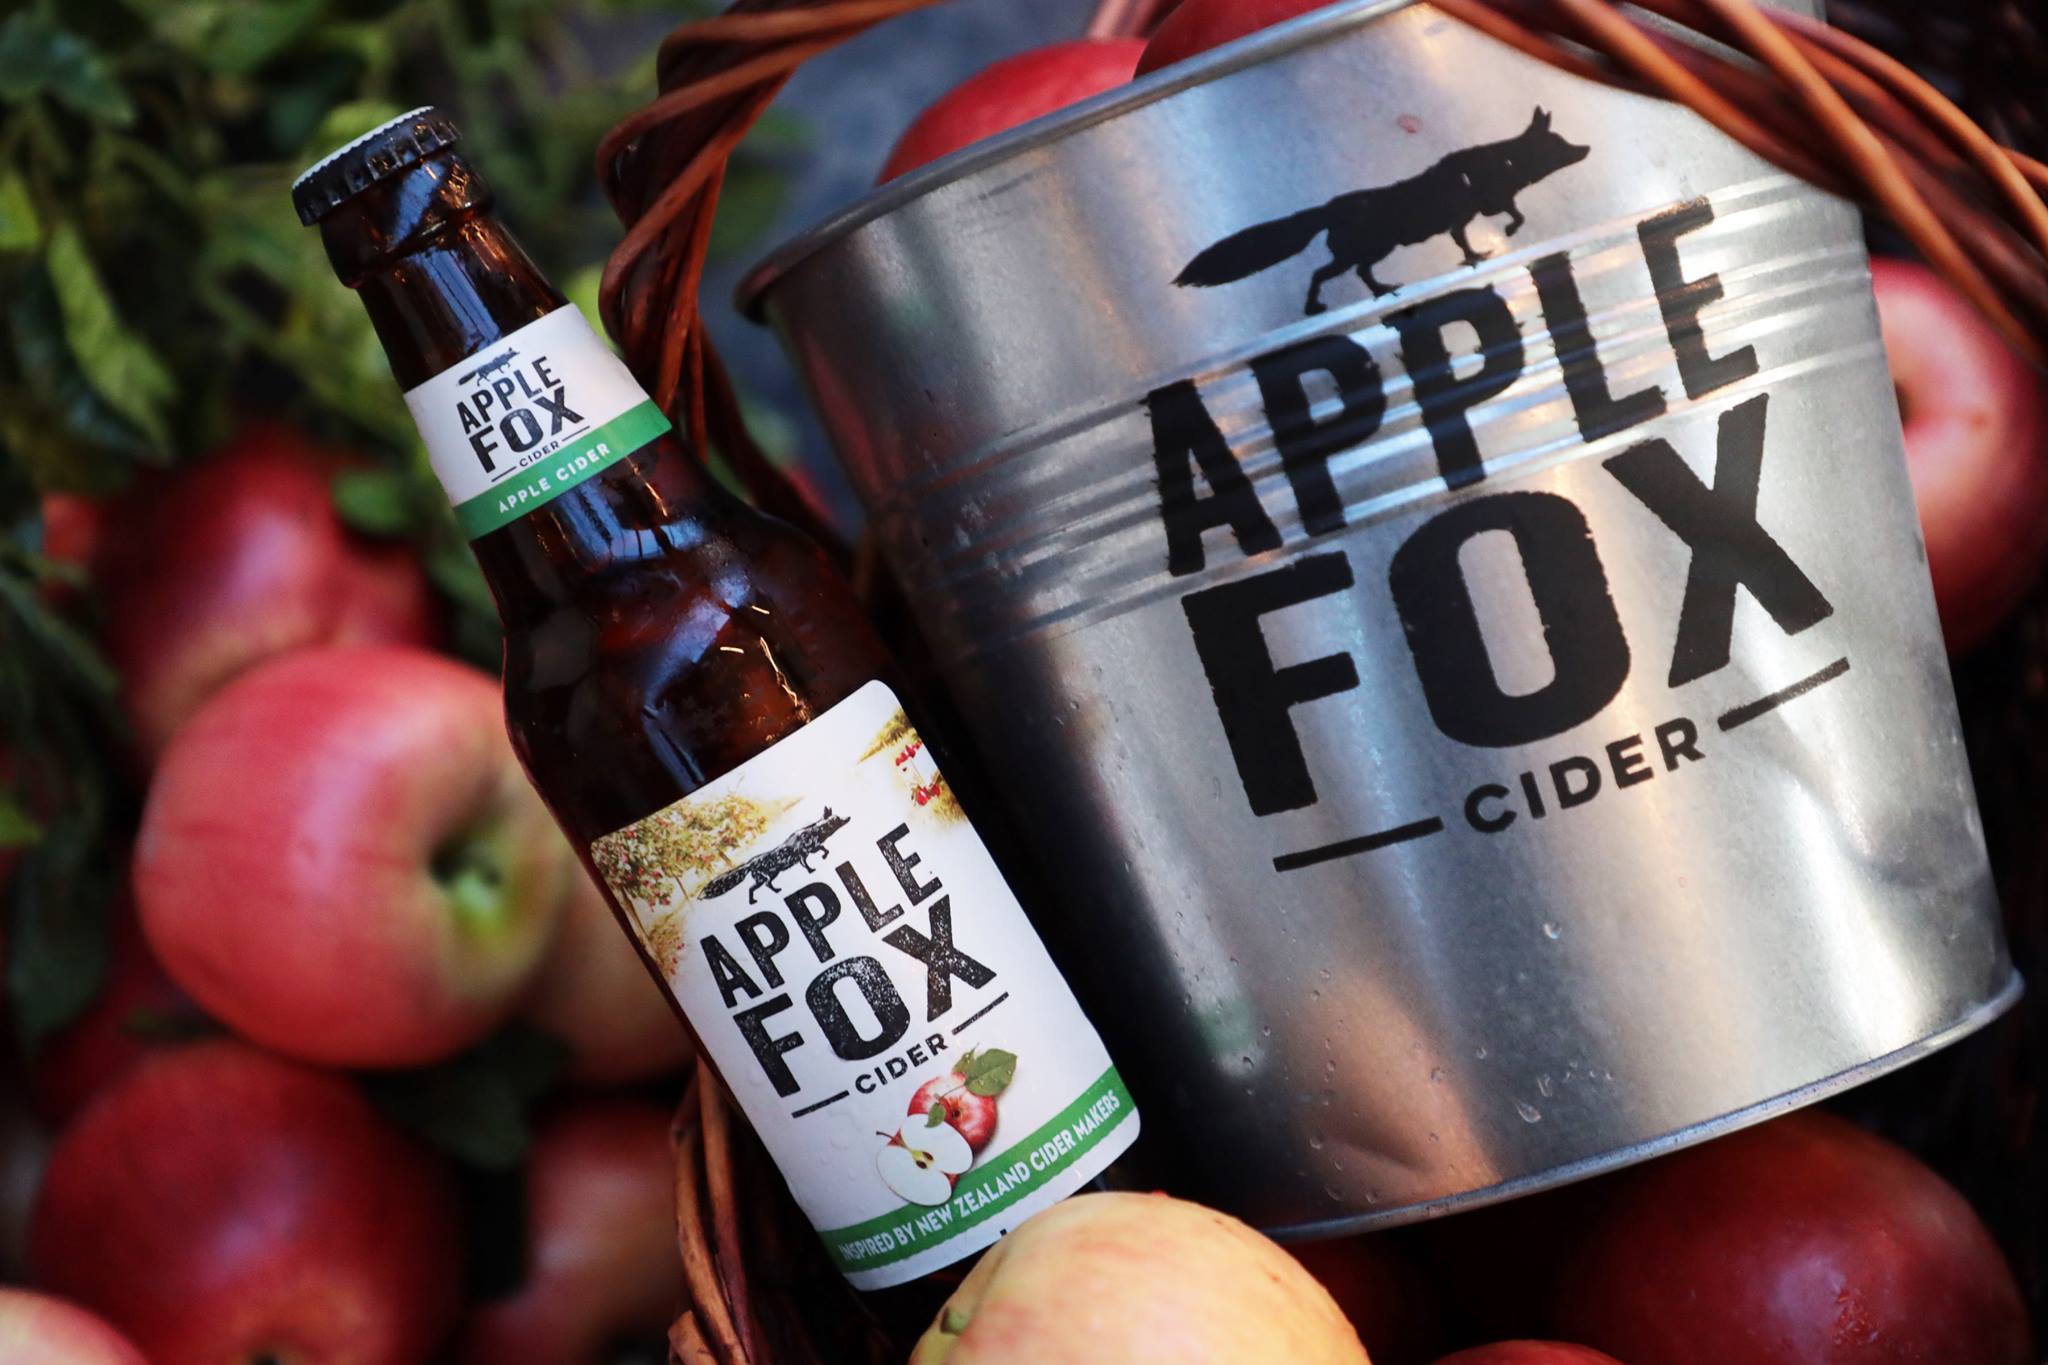 Beer apple fox Recommendations for